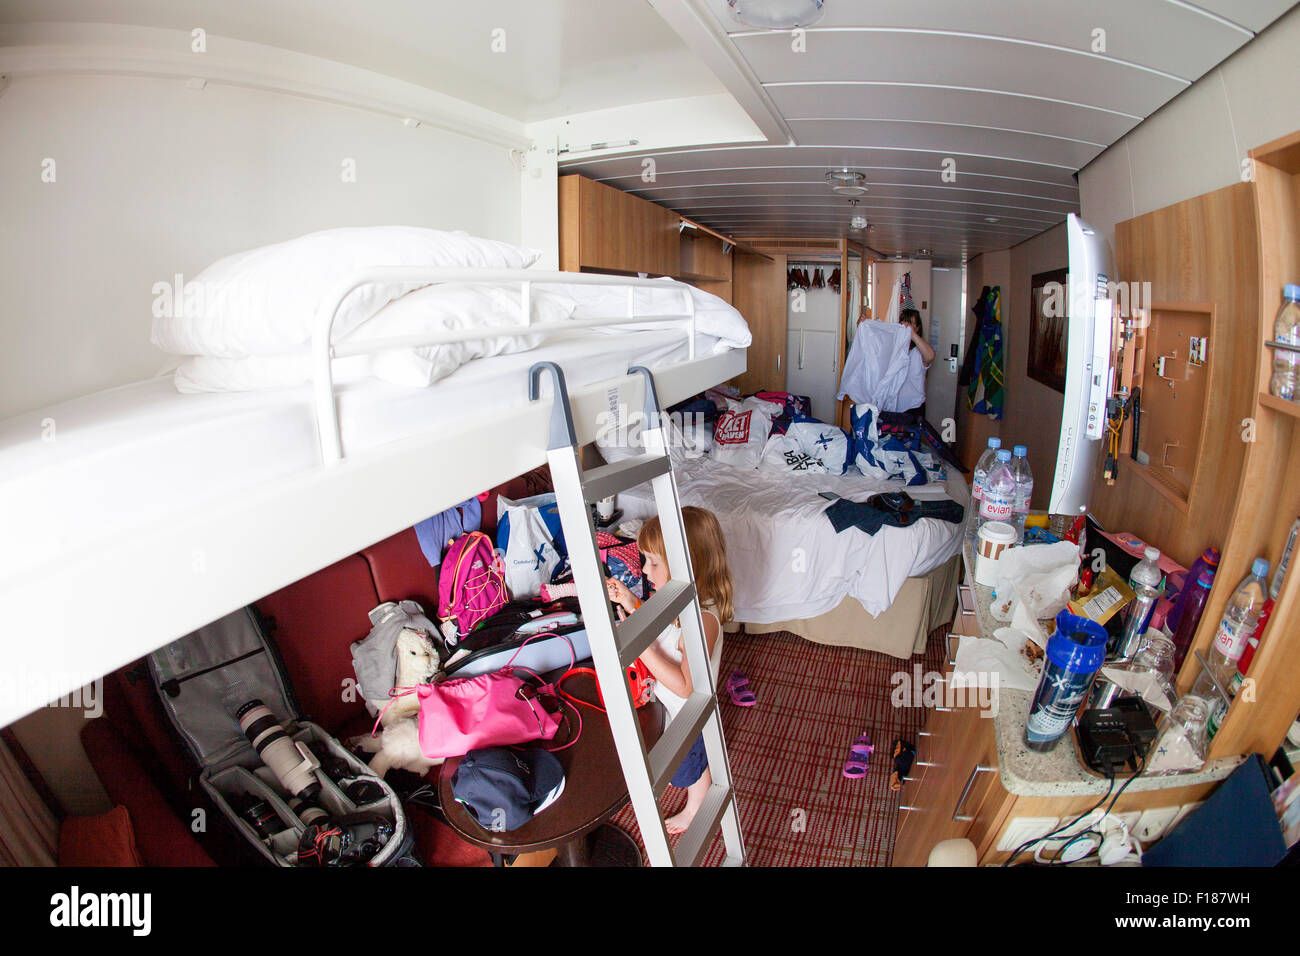 Image result for messy cabin on cruise